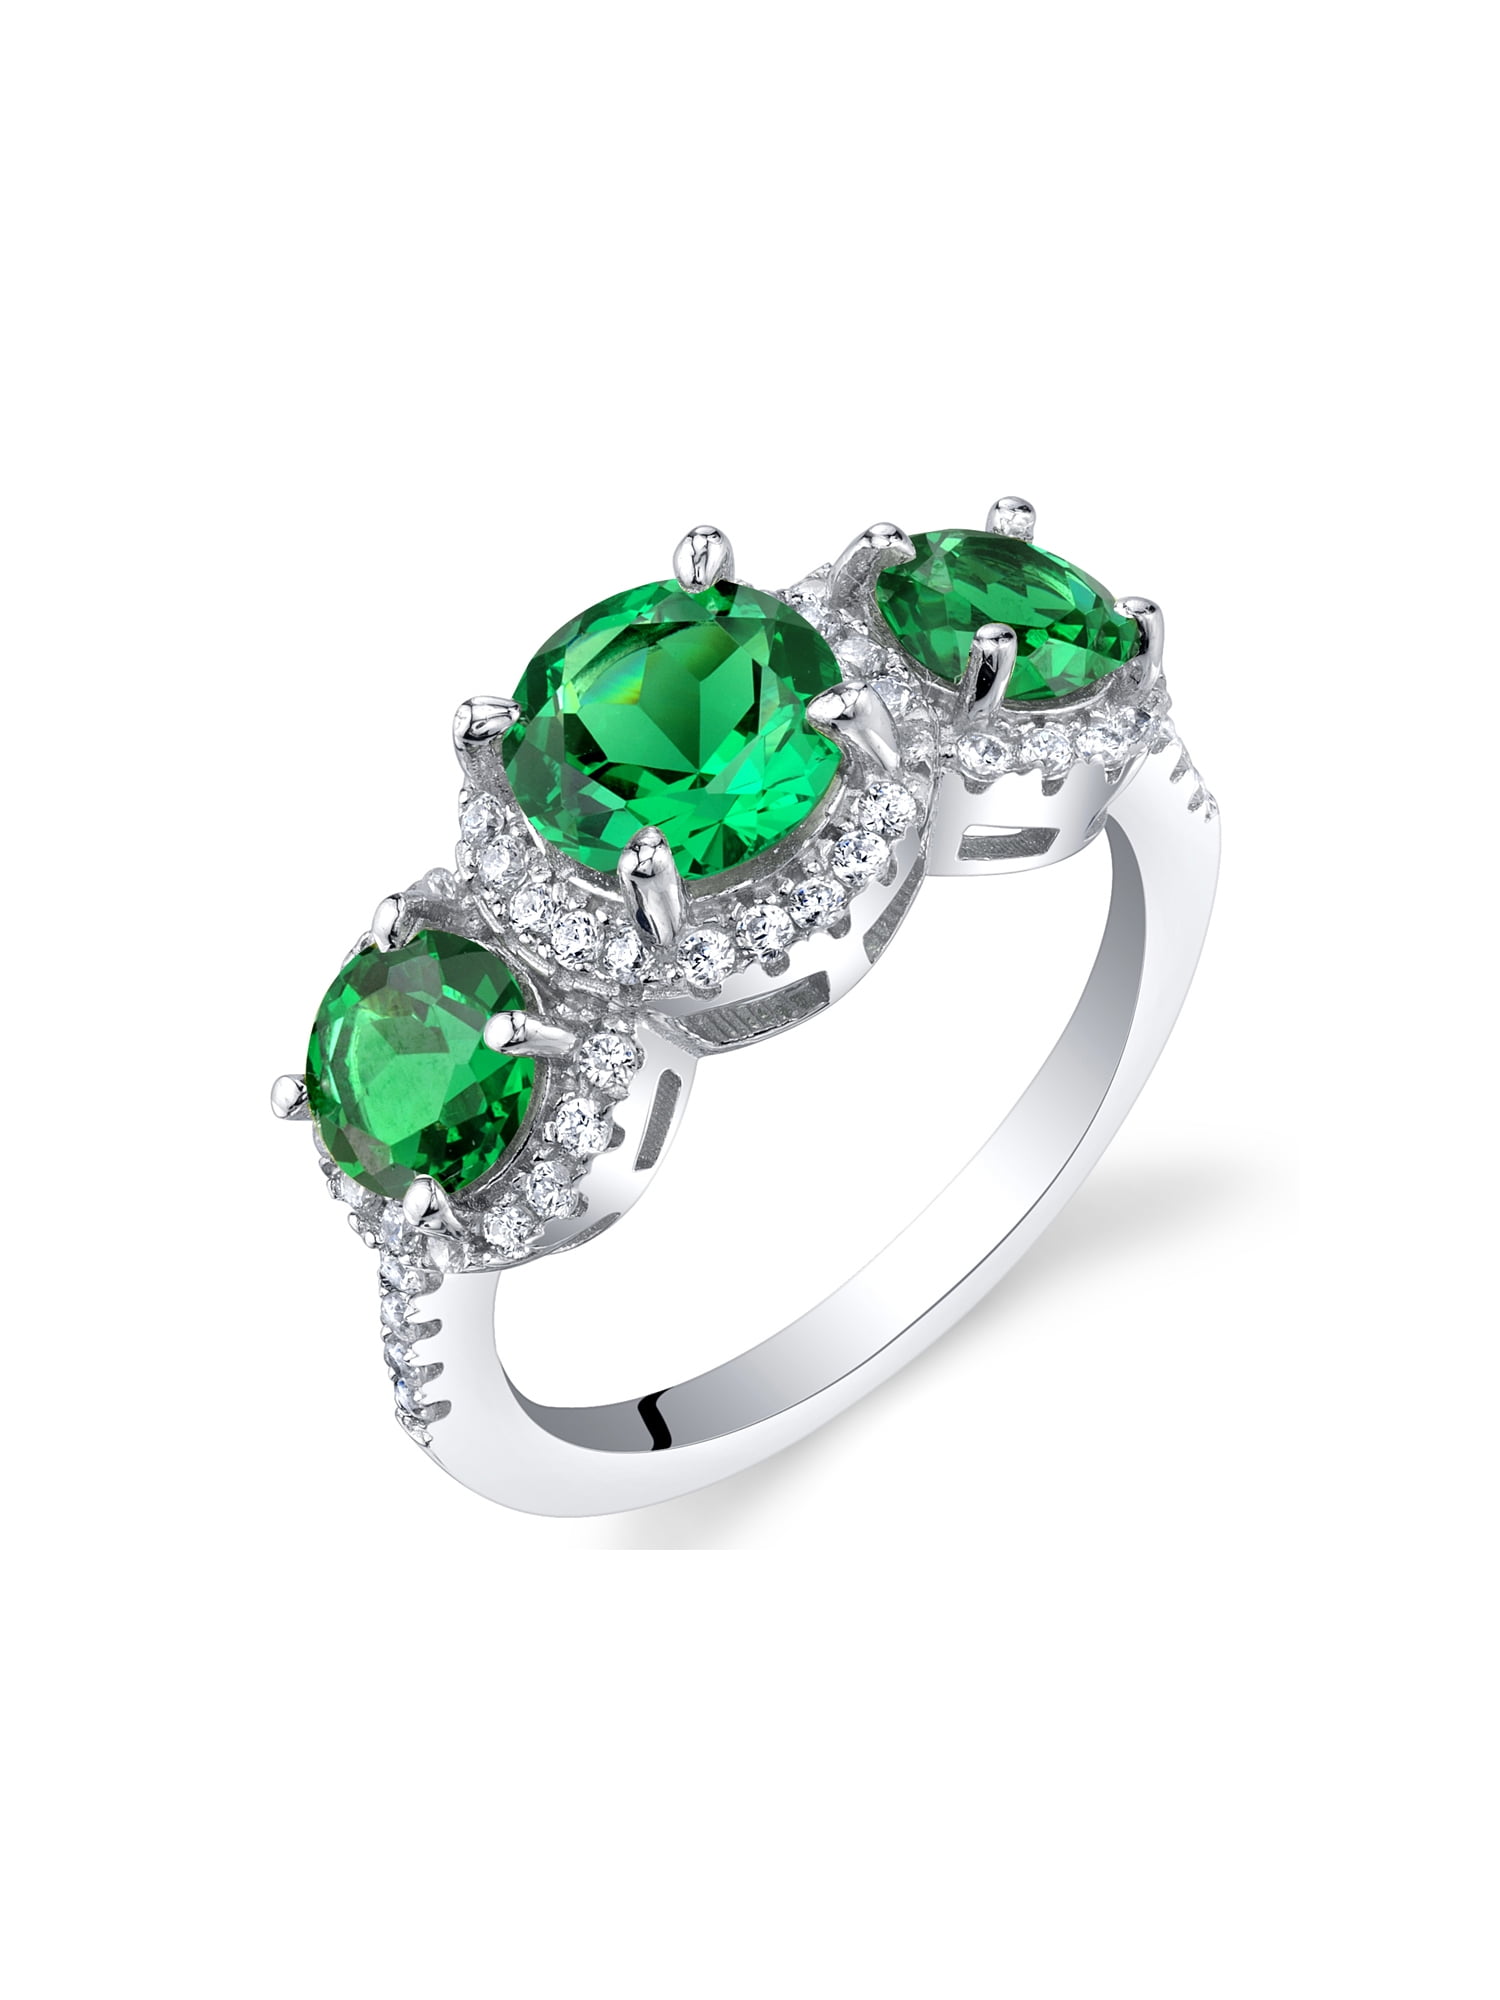 Simulated Emerald Sterling Silver 3 Stone Halo Ring Sizes 5 to 9 ...